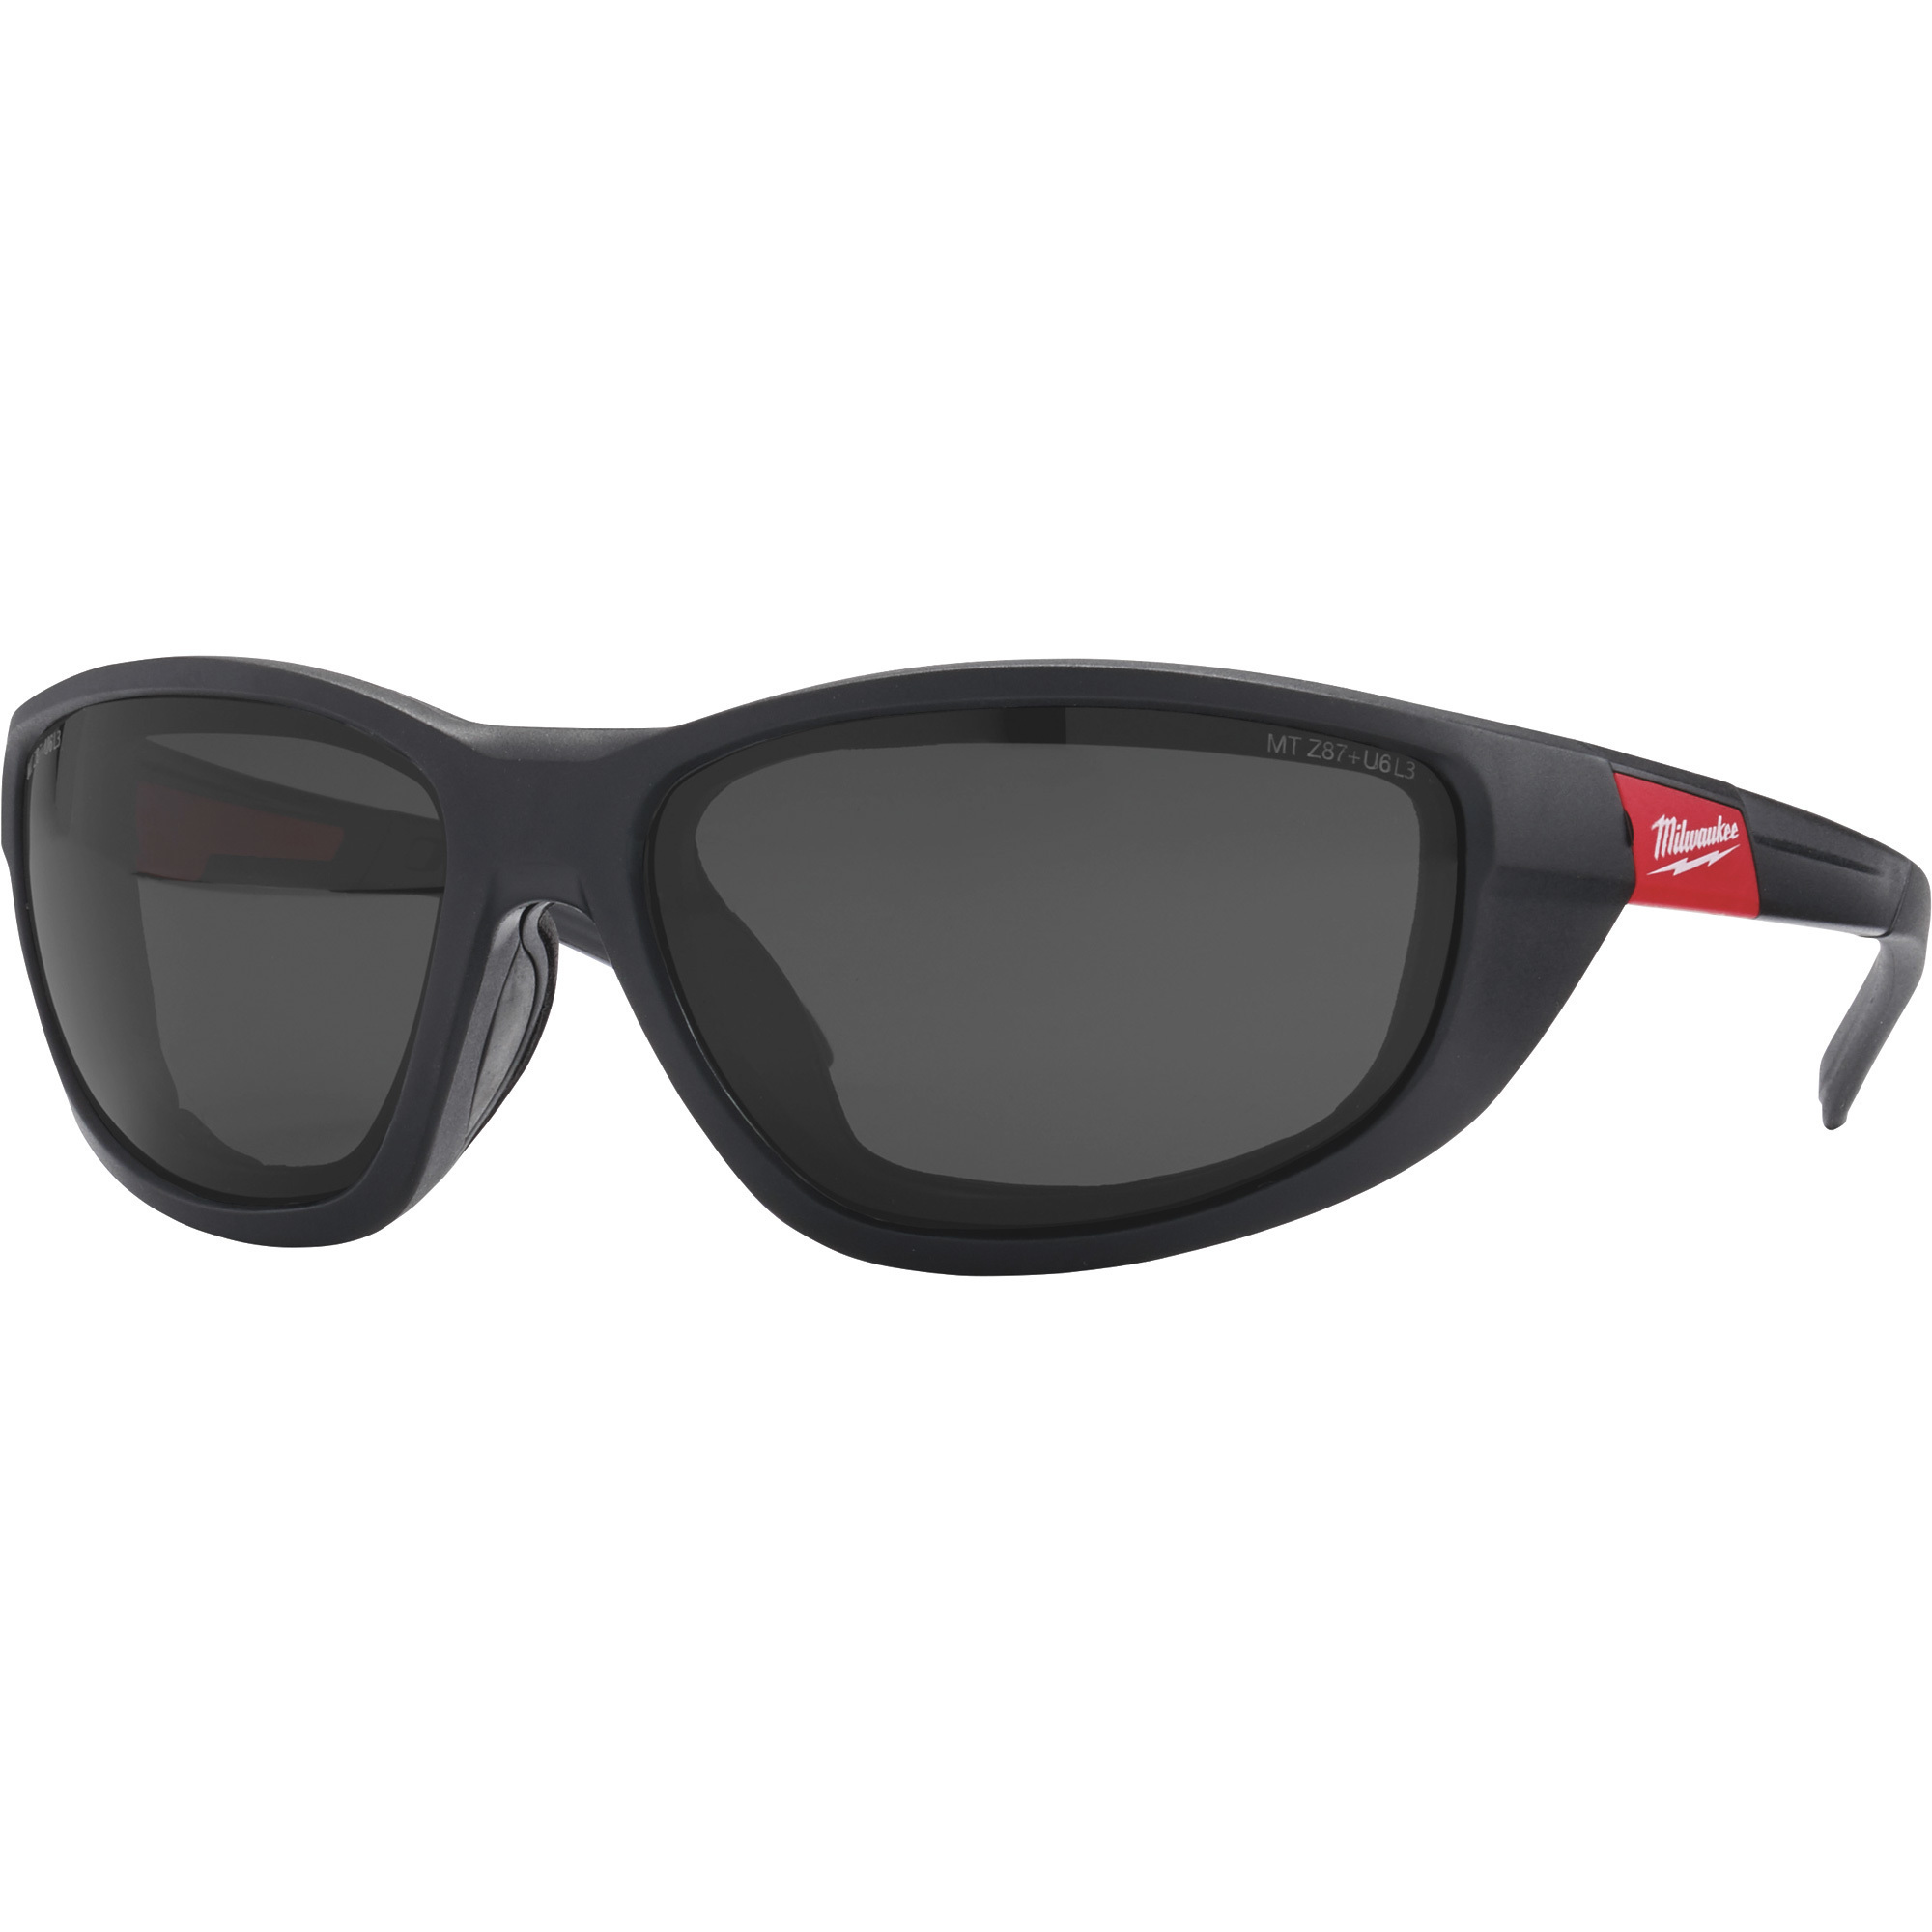 Milwaukee Anti-Fog, Scratch-Resistant, Impact-Resistant, Military-Grade Safety Glasses with Gaskets, Tinted Lenses, Black/Red Frames, Model 48-73-2045